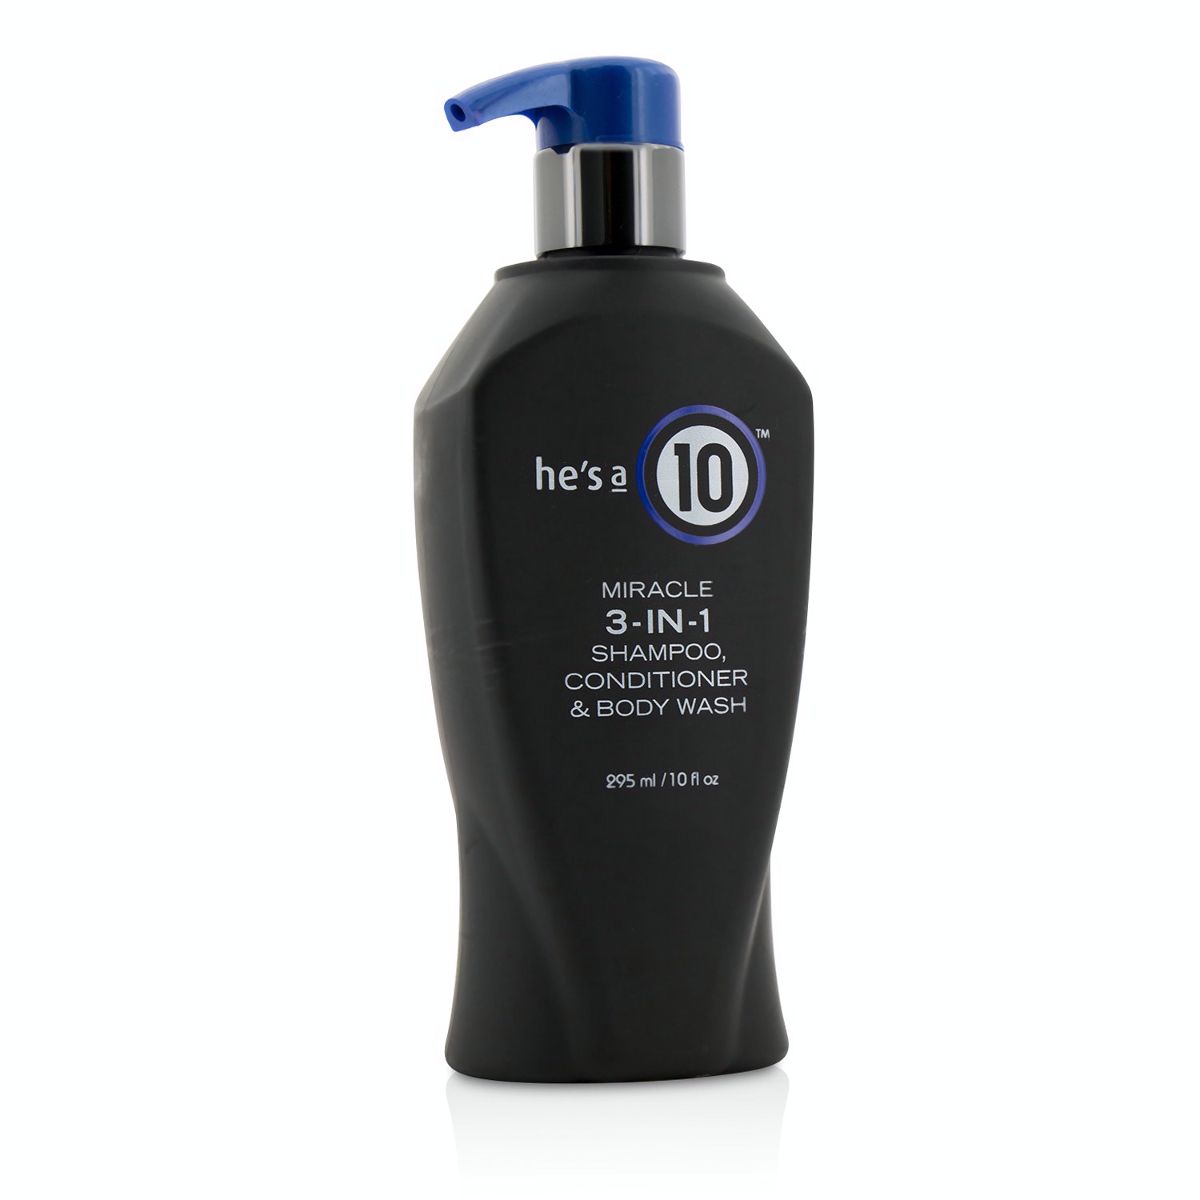 Hes A 10 Miracle 3-In-1 Shampoo Conditioner  Body Wash Its A 10 Image